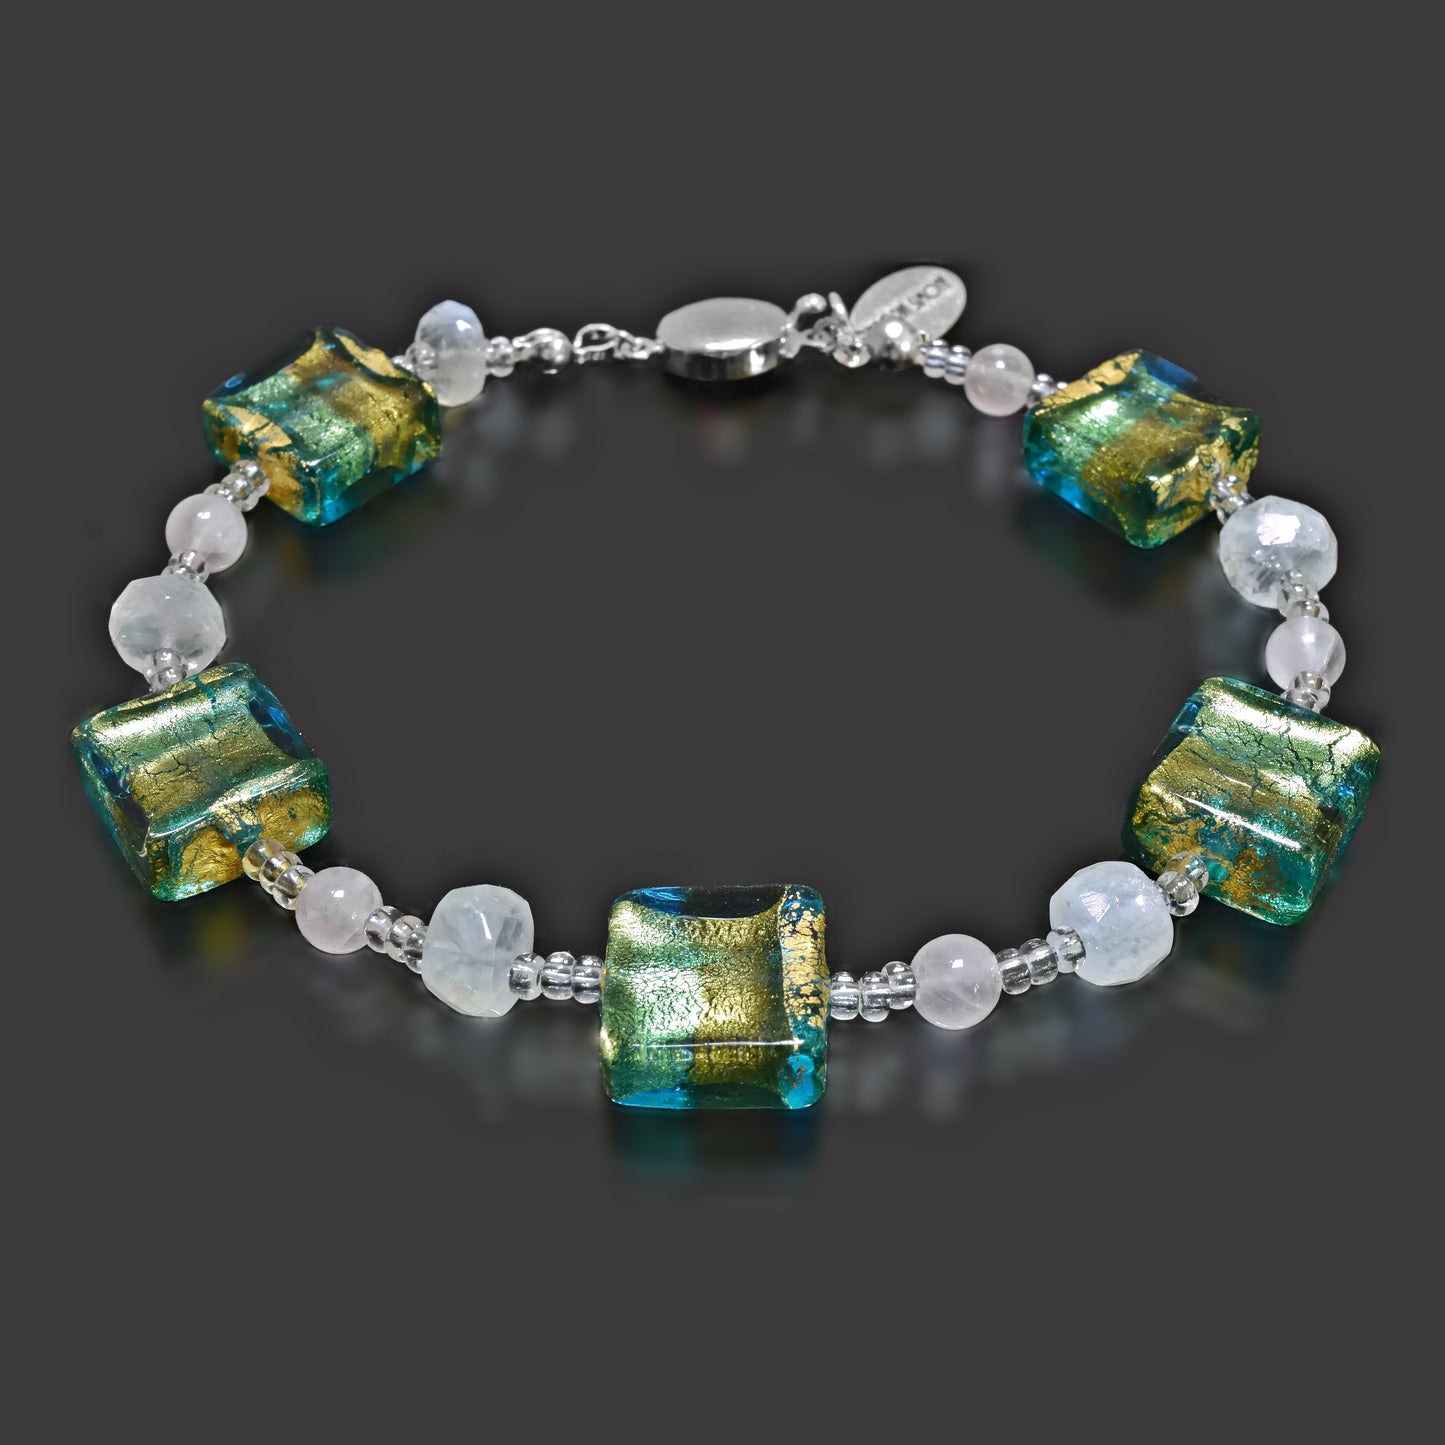 Blue and Green Venetian Bead Bracelet with Rose Quartz and Moonstone Gold-Filled White